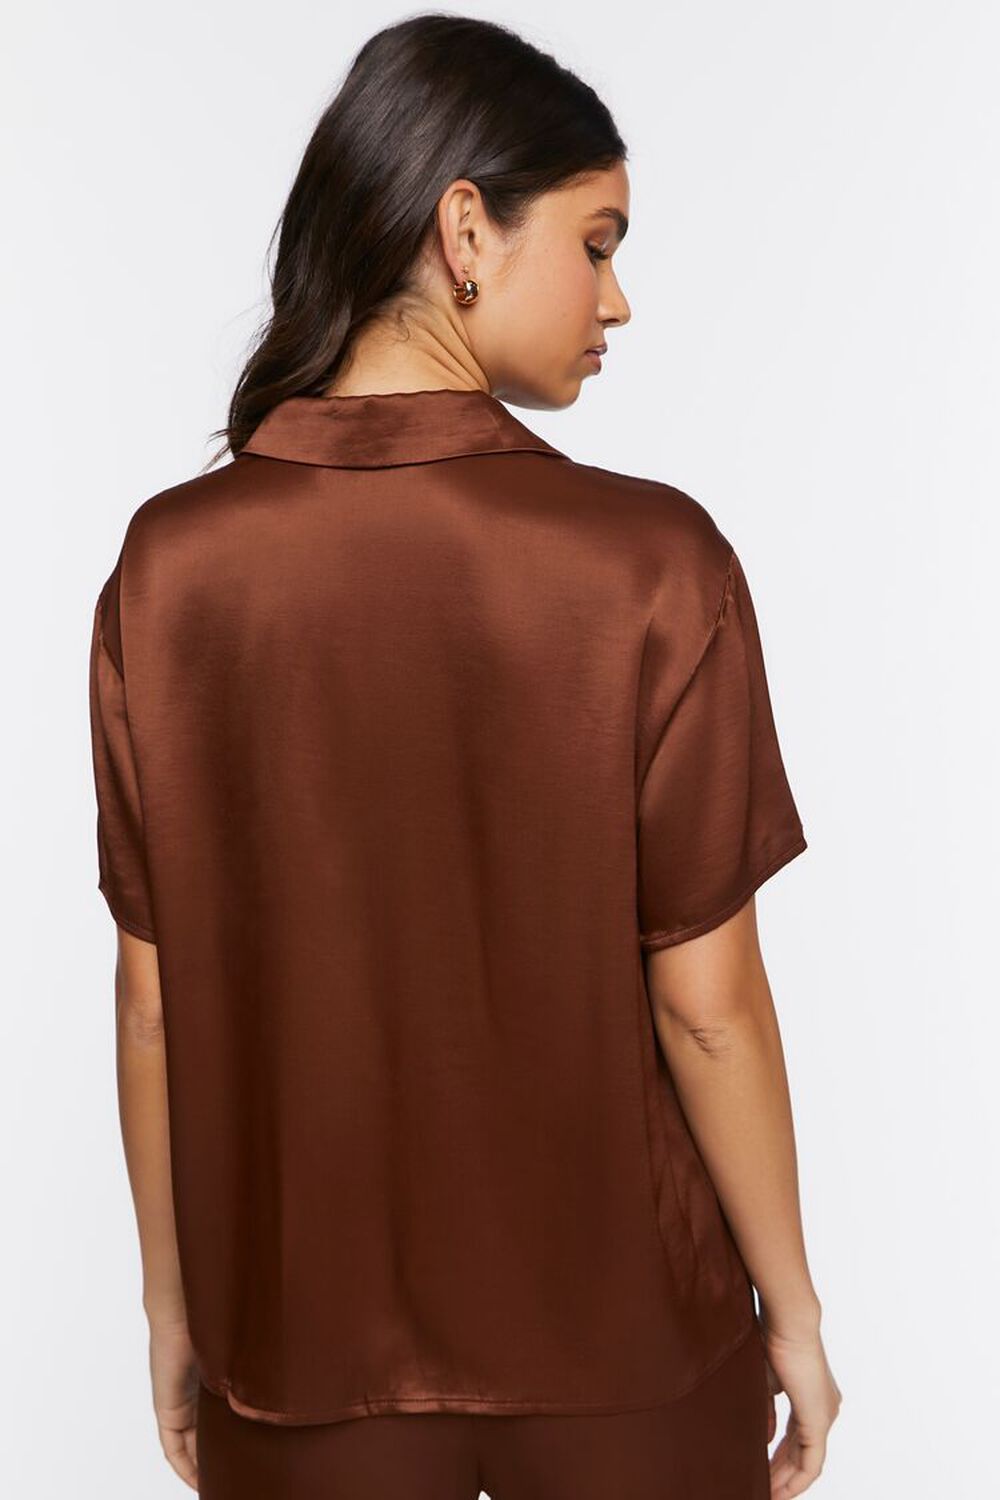 CHOCOLATE Oversized Button-Front Shirt, image 3